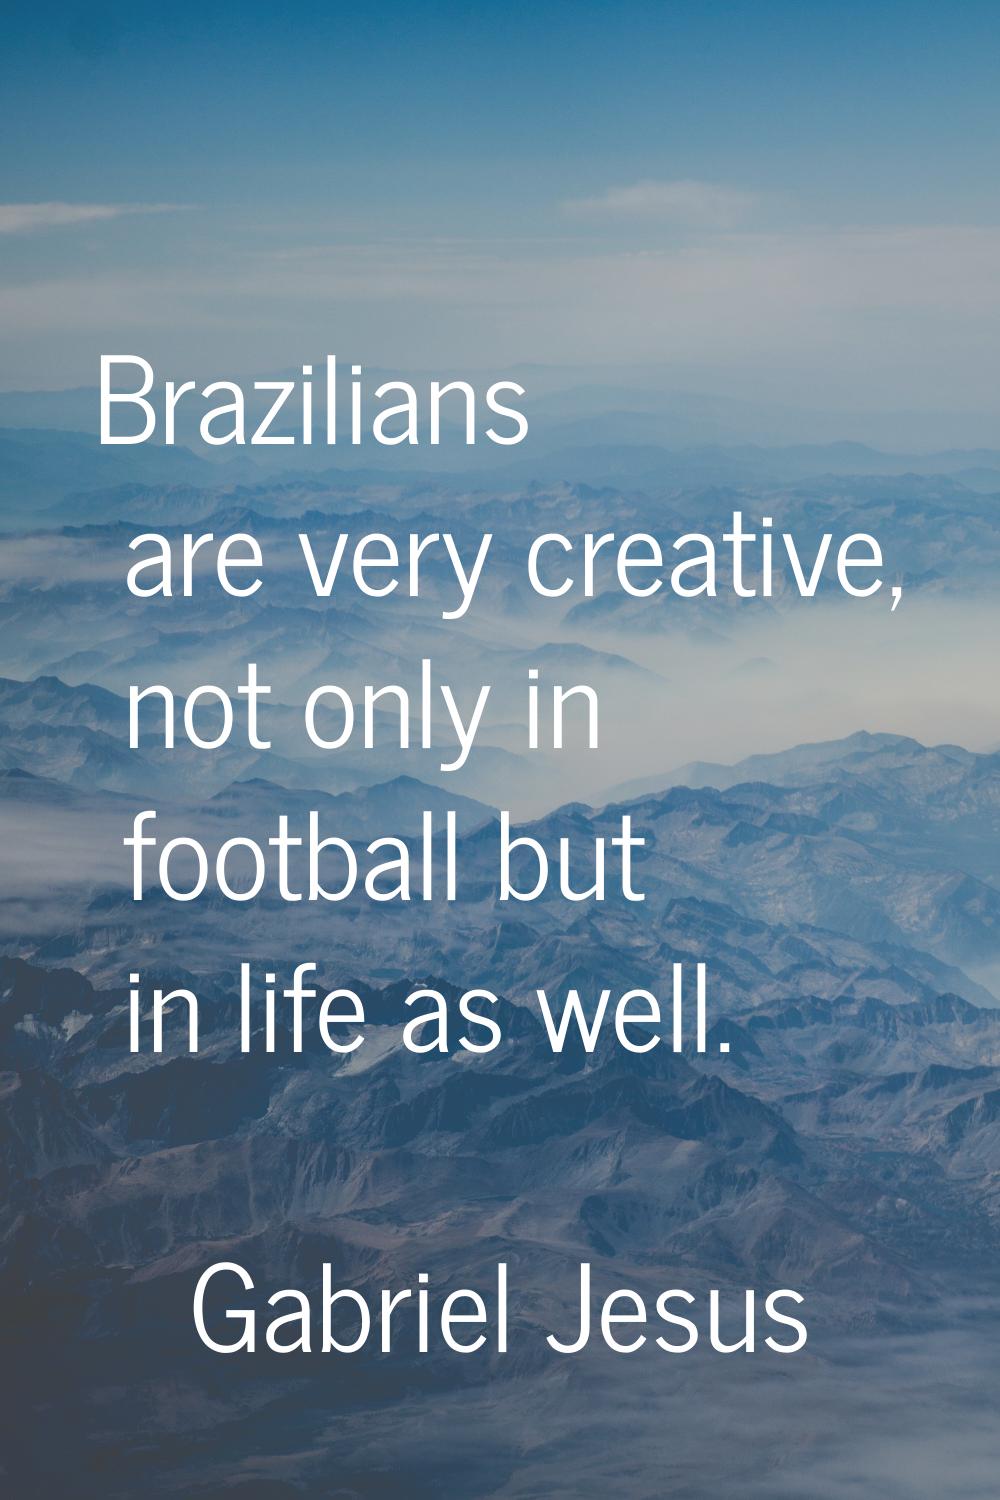 Brazilians are very creative, not only in football but in life as well.